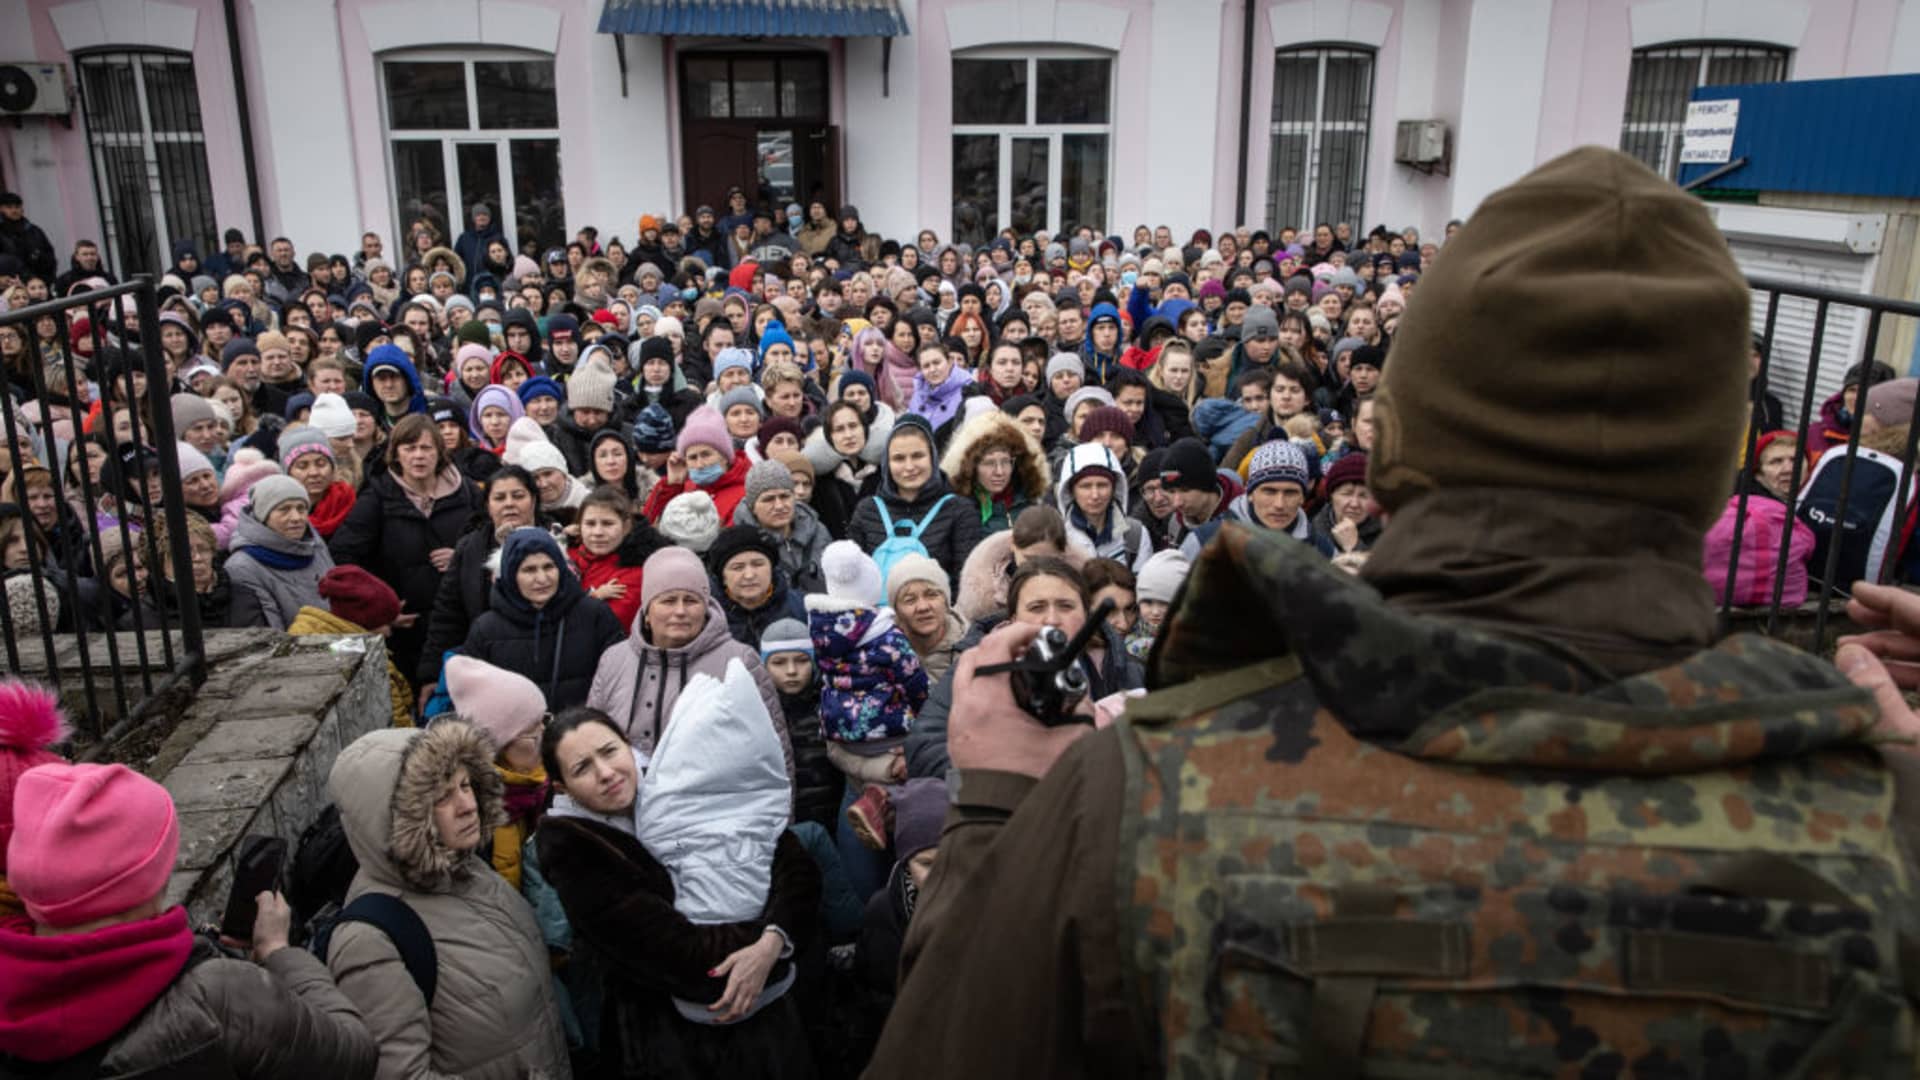 A member of the Ukrainian military gives instructions to women and children that fled fighting in Bucha and Irpin before boarding an evacuation train from Irpin City to Kyiv that was scheduled after heavy fighting overnight forced many to leave their homes on March 04, 2022 in Irpin, Ukraine.